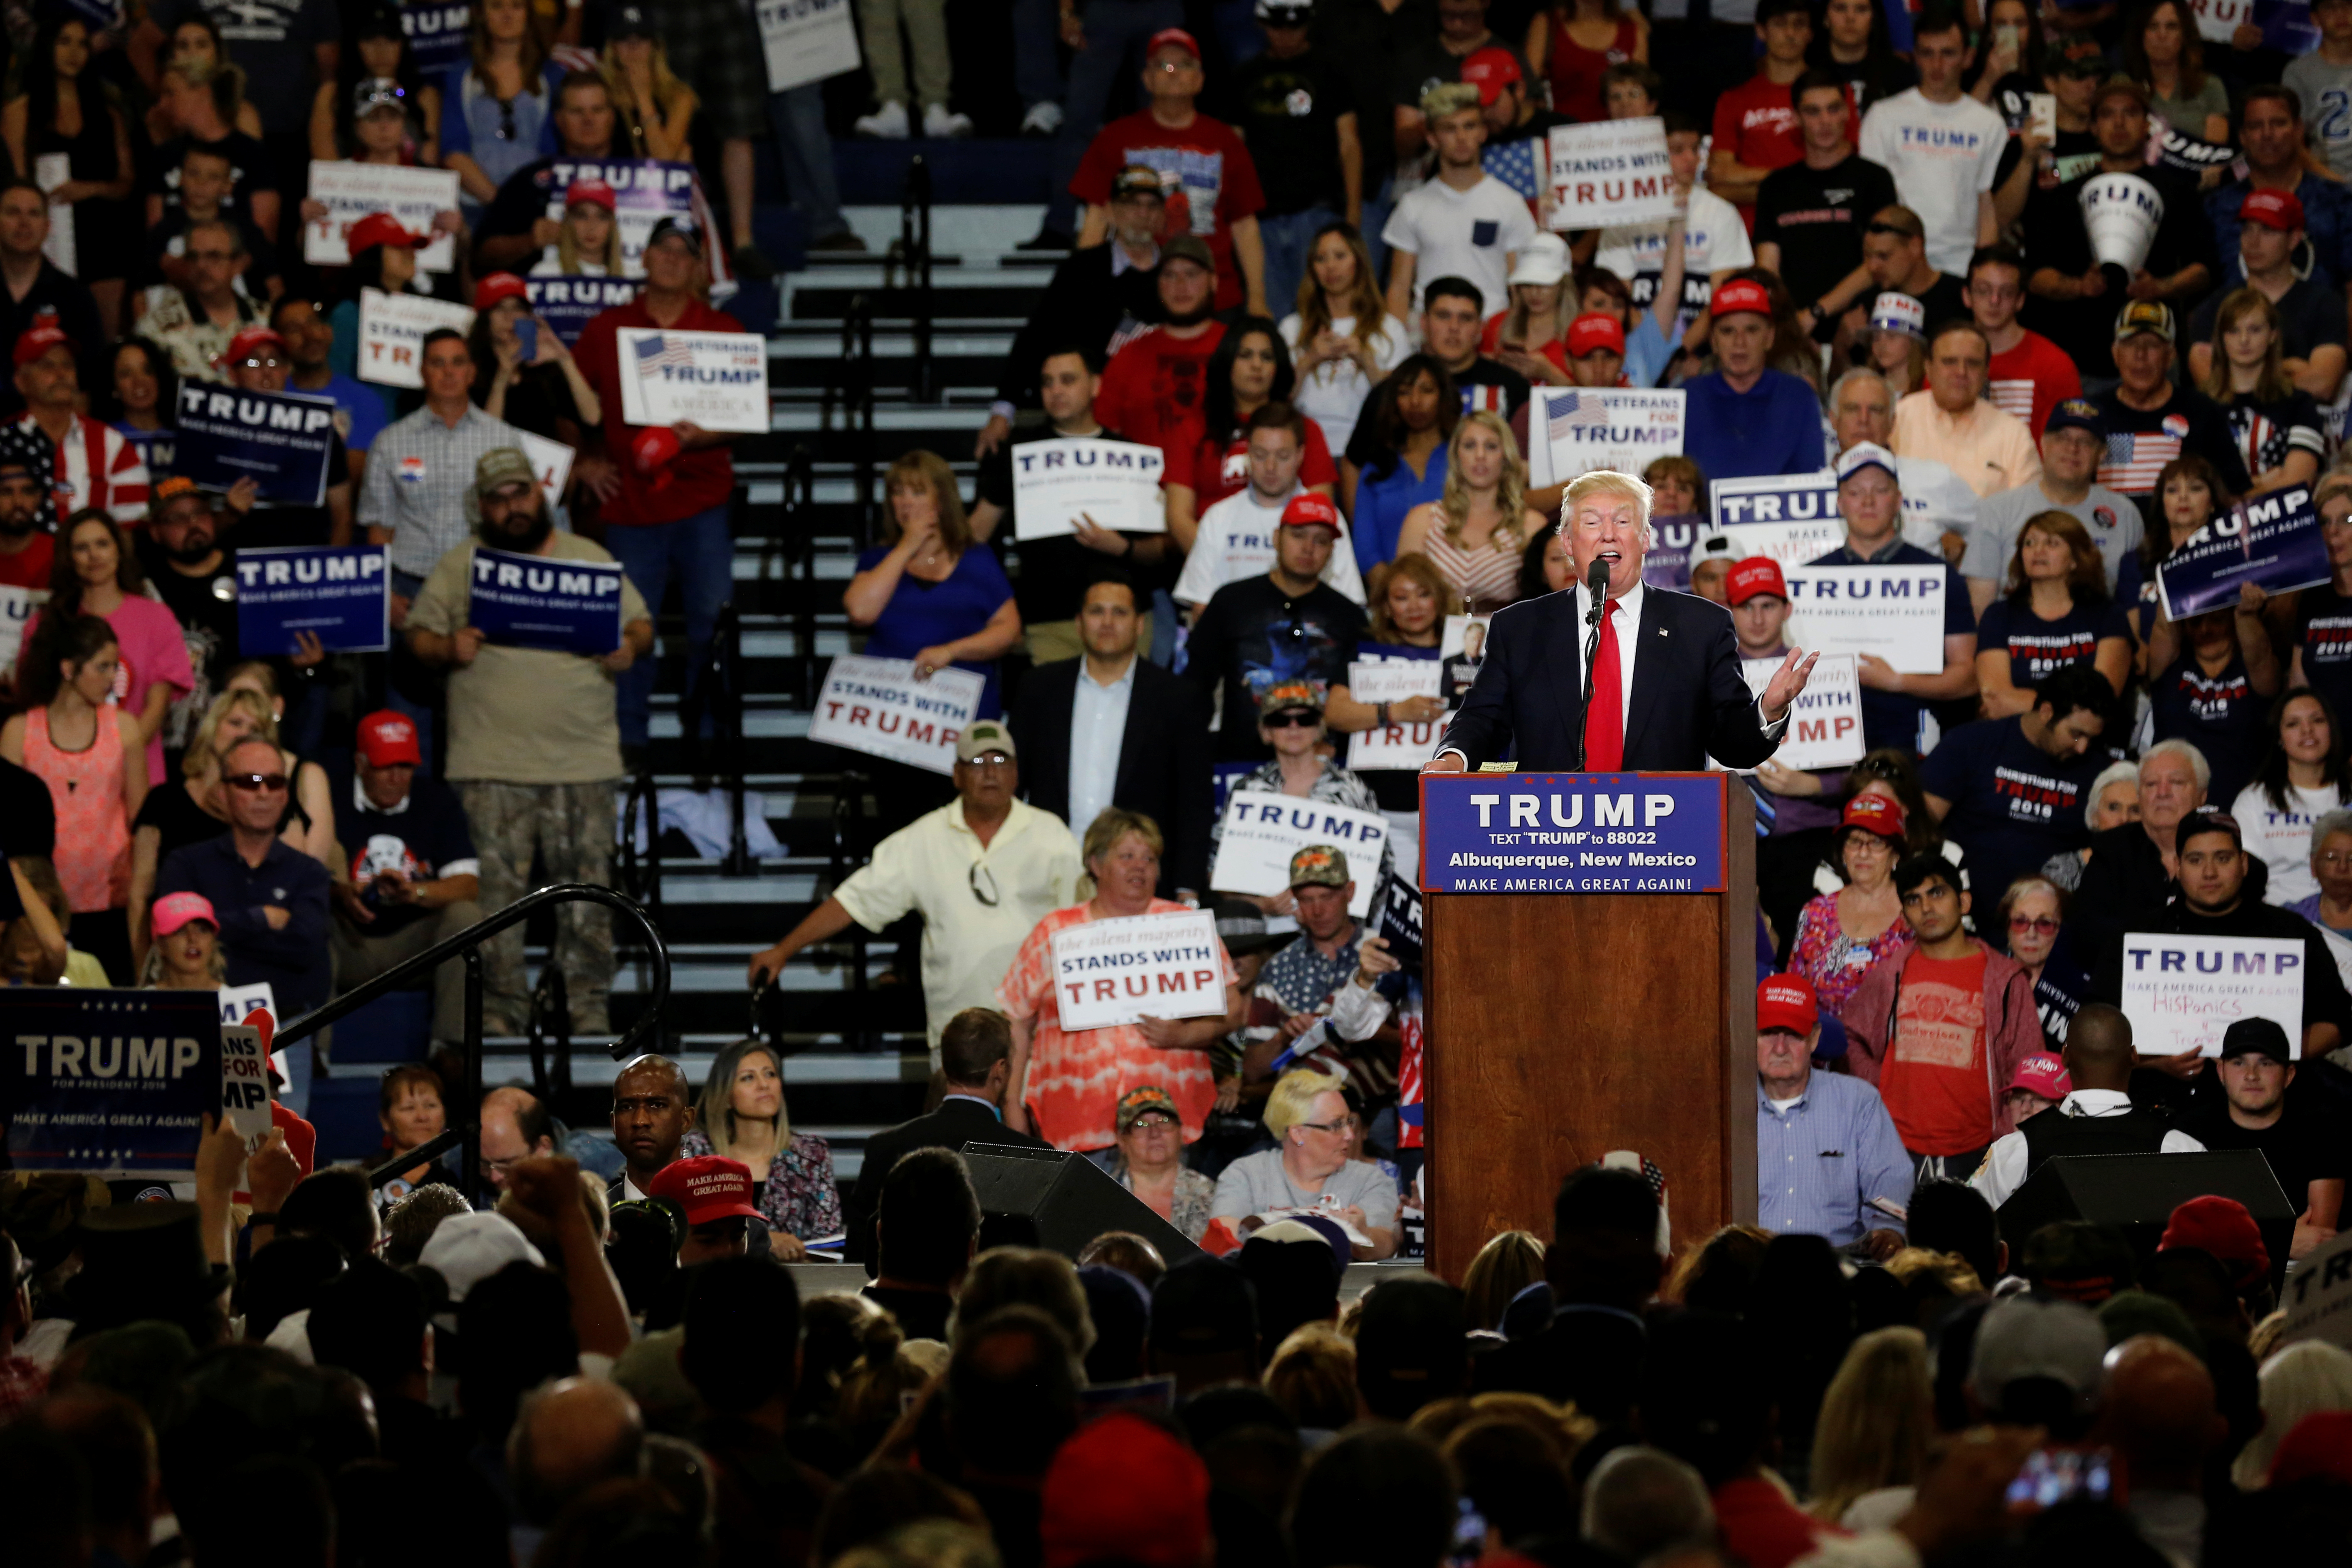 Trump holds a rally with supporters in Albuquerque